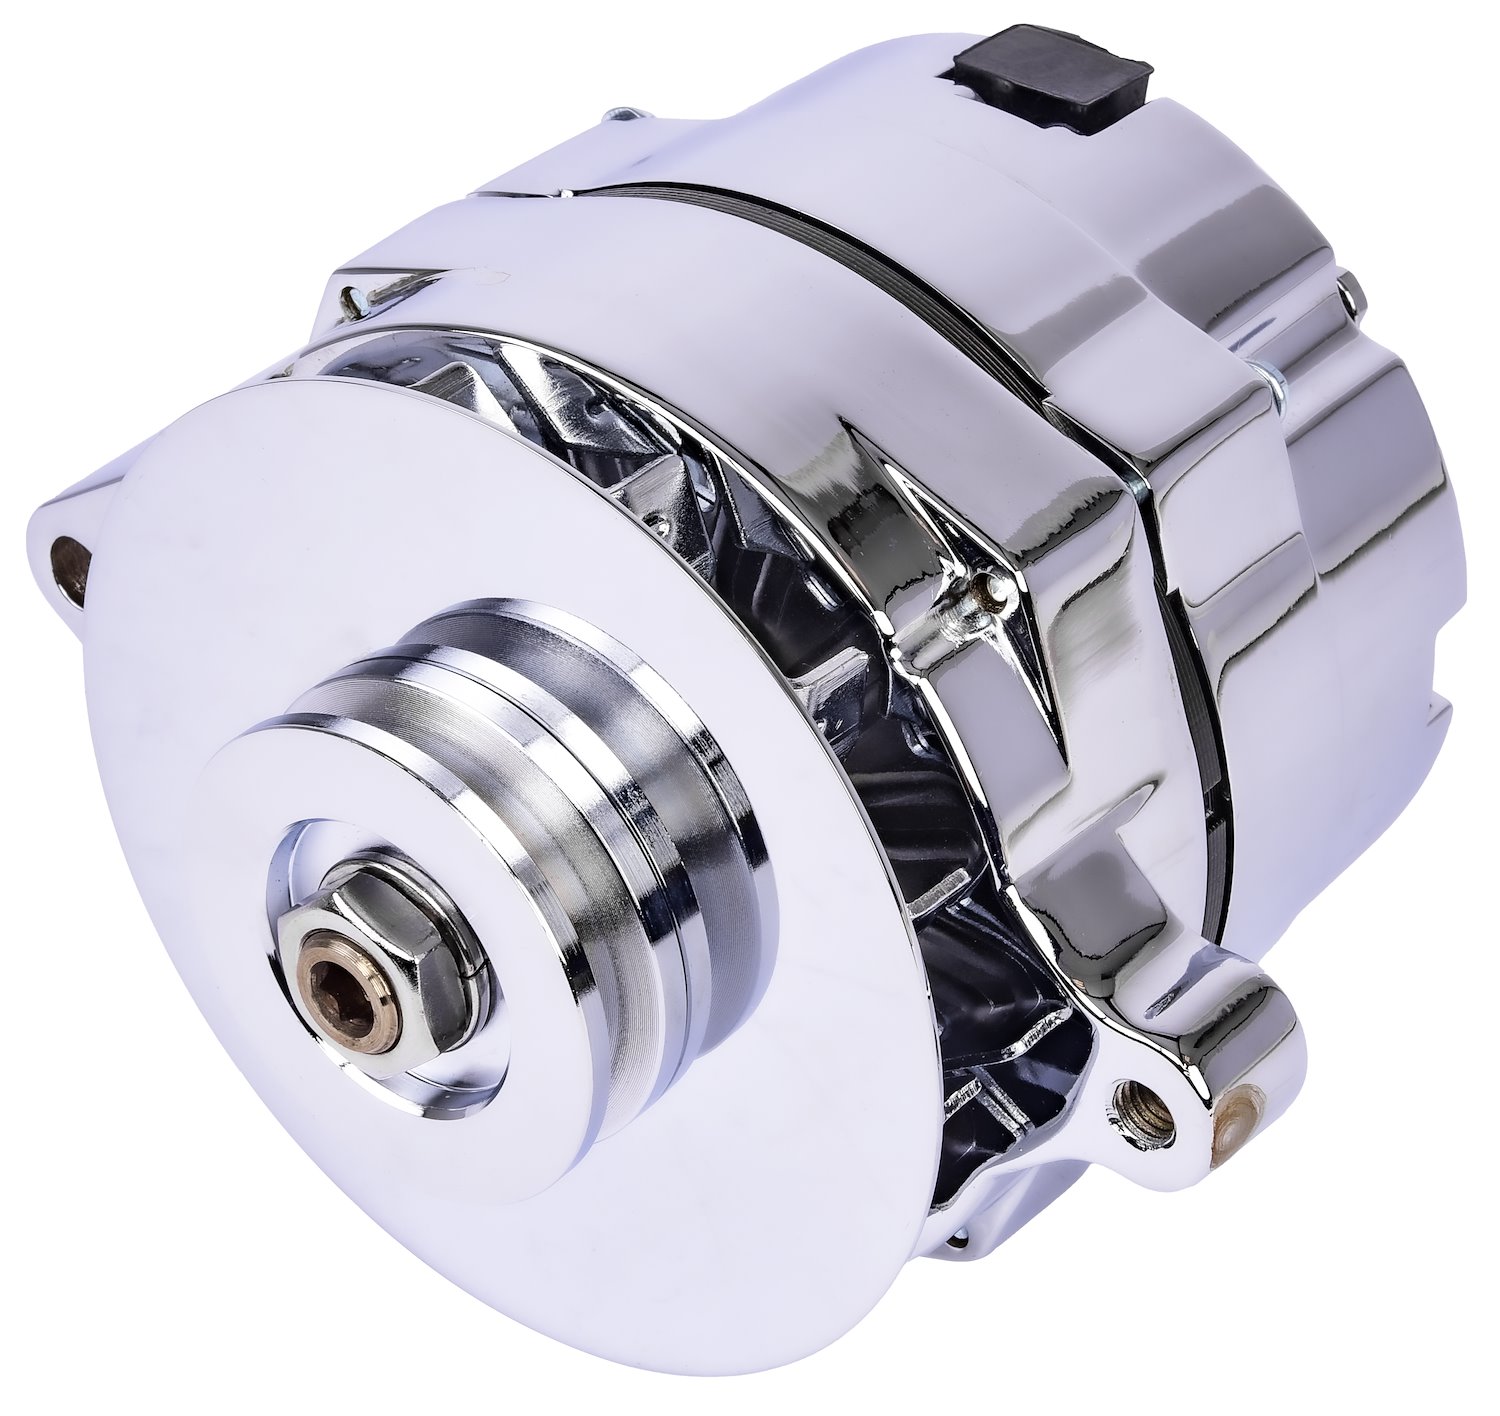 Ford 1-Wire Alternator, 140 amp Output with Single Groove V-Belt Pulley [Chrome Plated Finish]